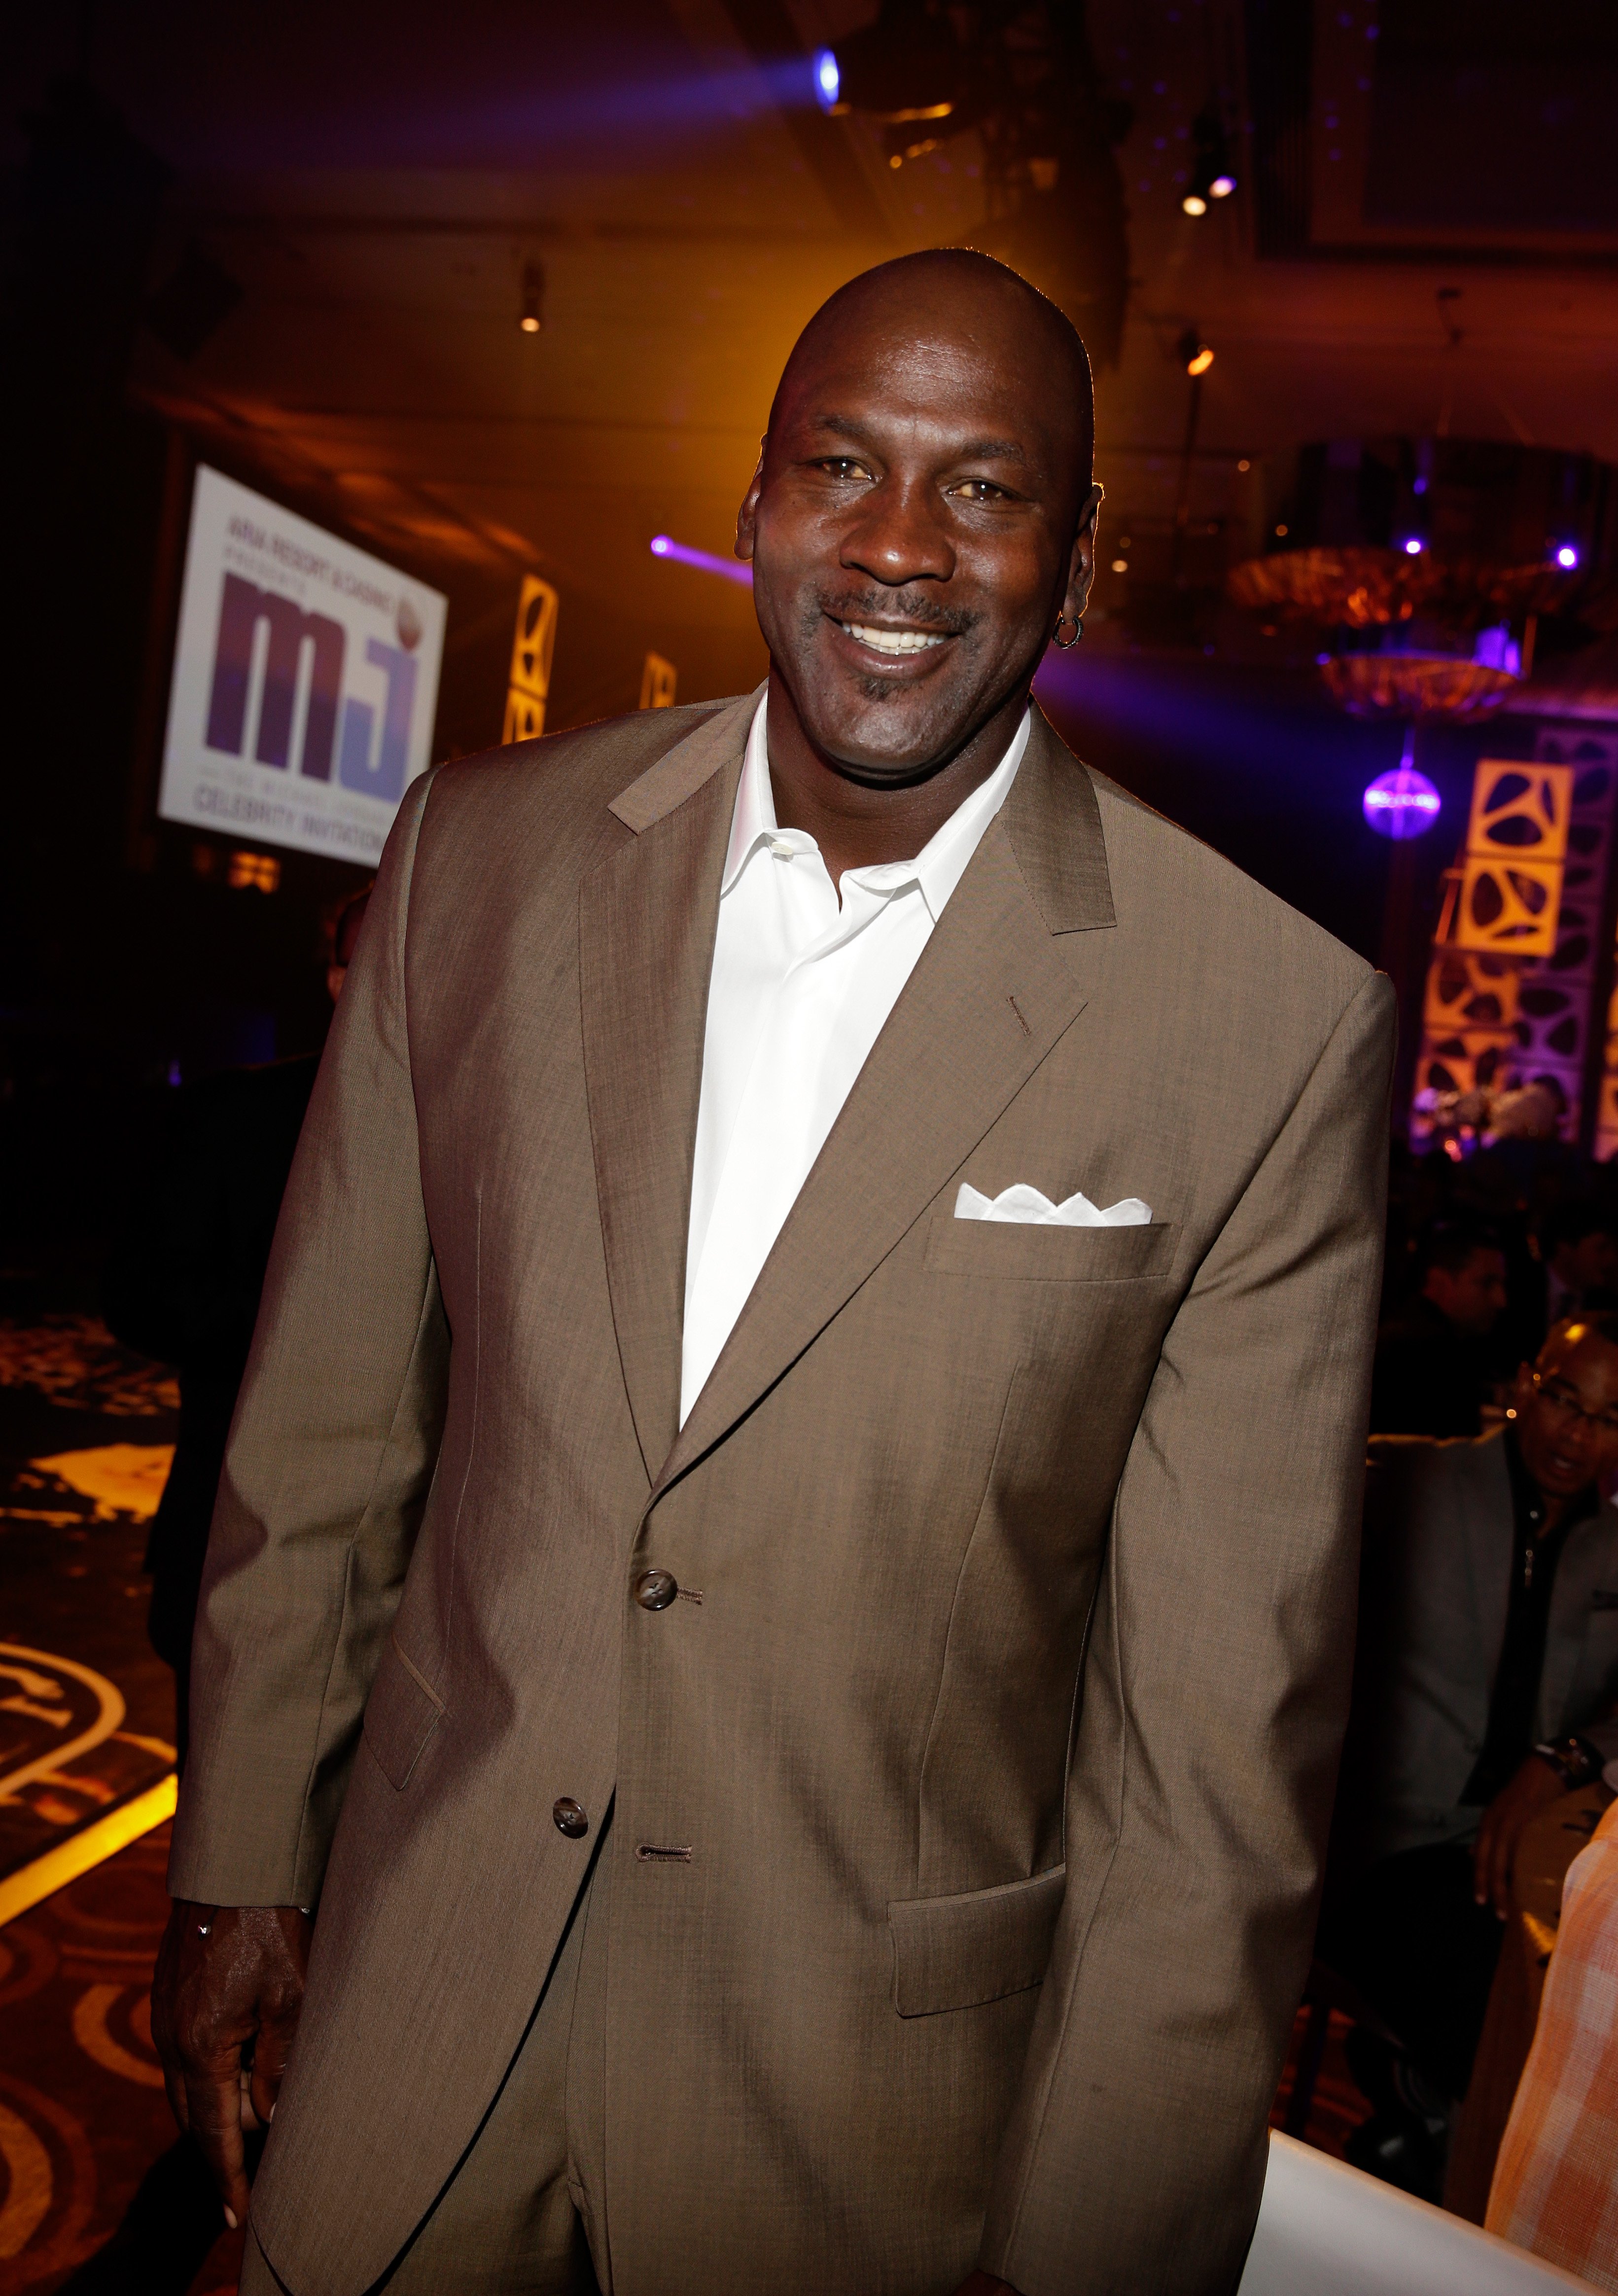 Michael Jordan attends the 13th annual Michael Jordan Celebrity Invitational gala at the ARIA Resort & Casino at CityCenter on April 4, 2014. | Photo: Getty Images